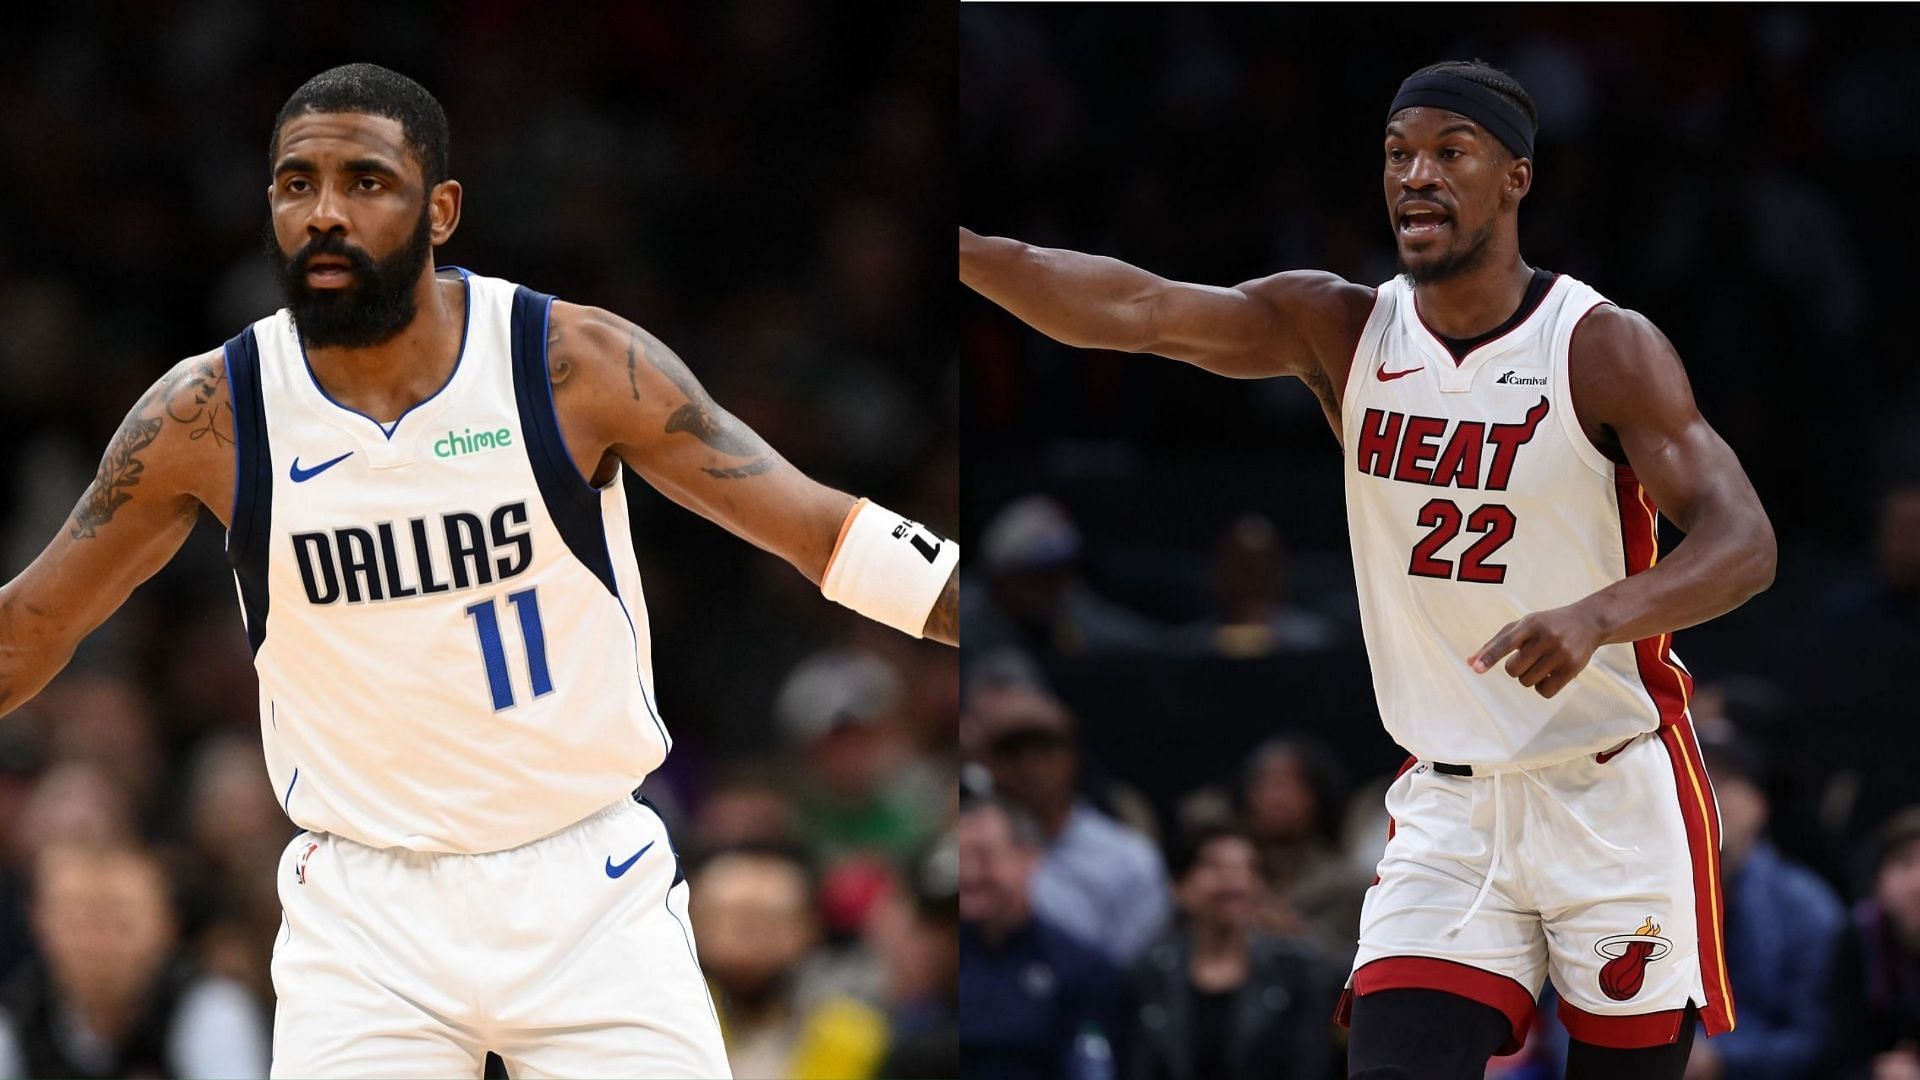 How to watch Dallas Mavericks vs Miami Heat NBA basketball game tonight? TV channel, streaming options &amp; more explored